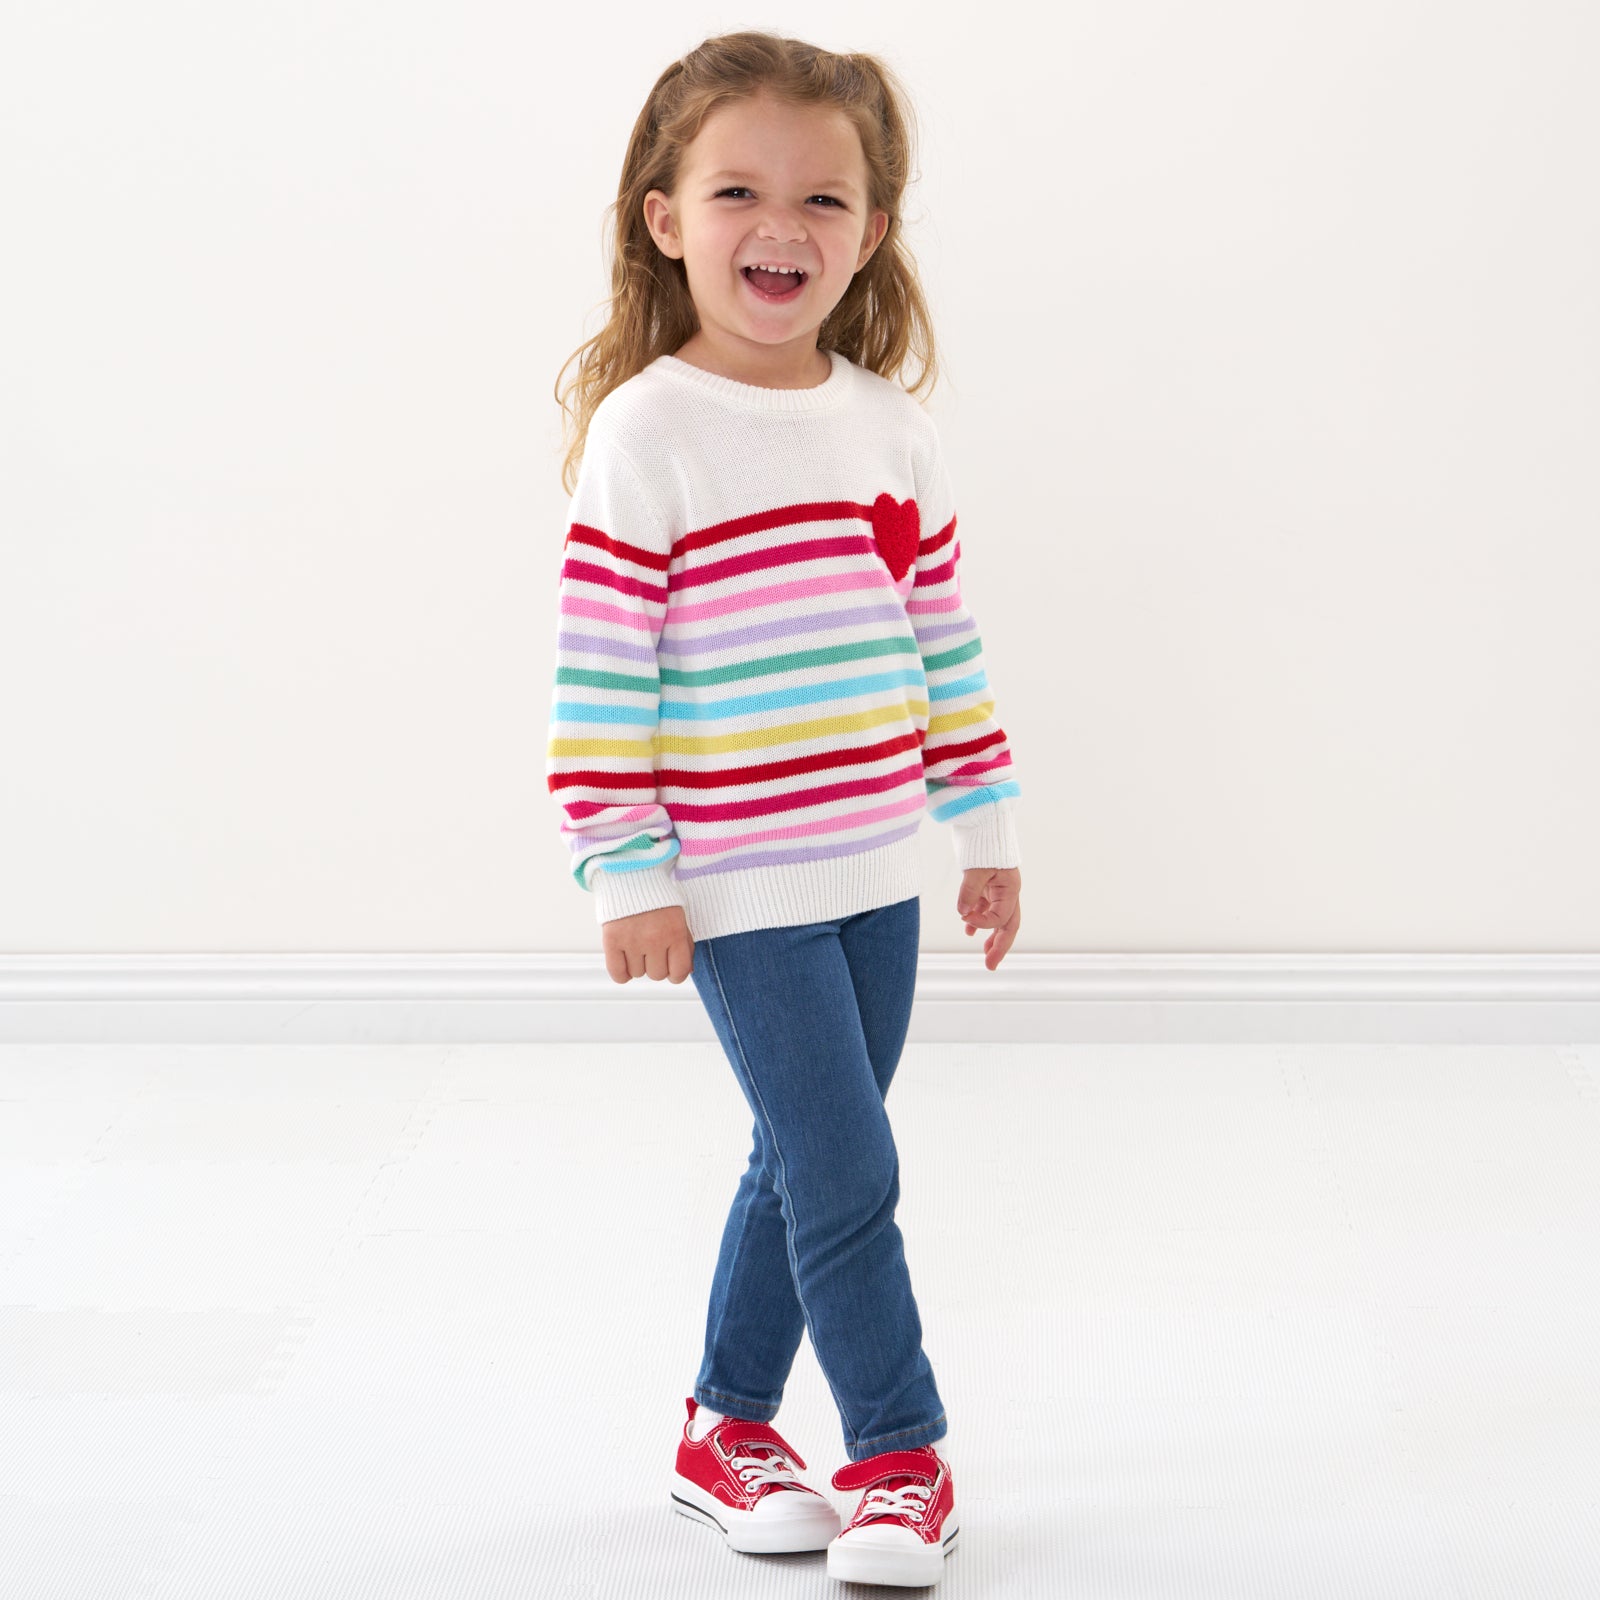 Child wearing a Multi Stripes knit sweater and coordinating pants